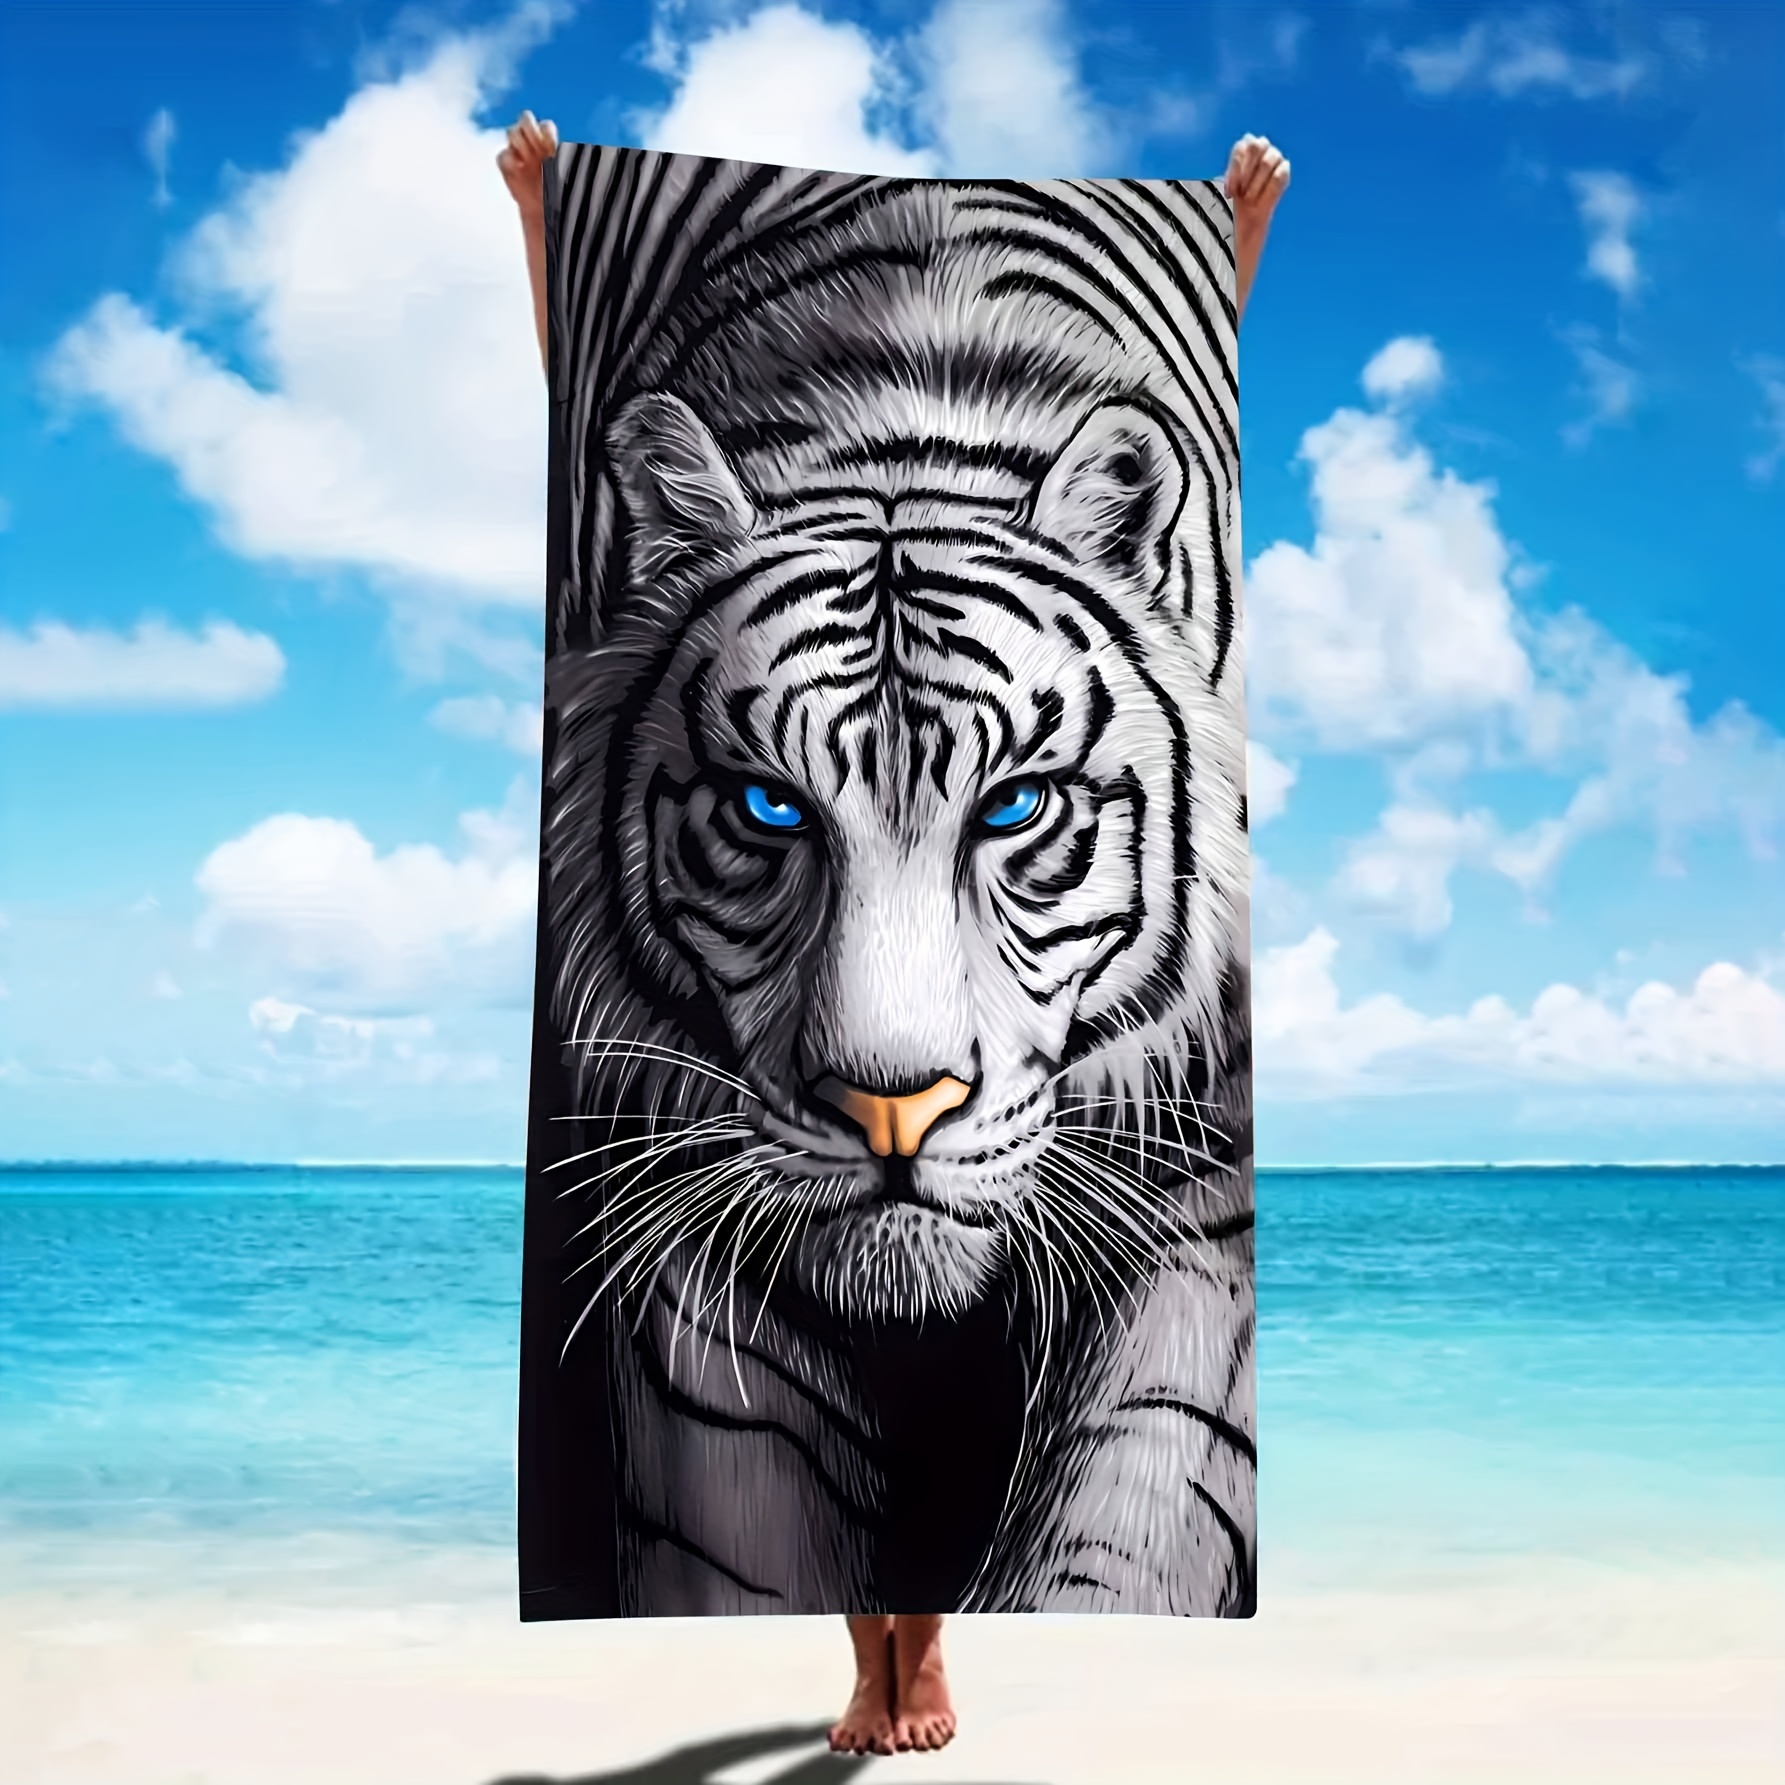 

Oversized Tiger Print Beach Towel - Soft, Quick-dry Microfiber For Ultimate Absorption And Comfort On Your Next Vacation